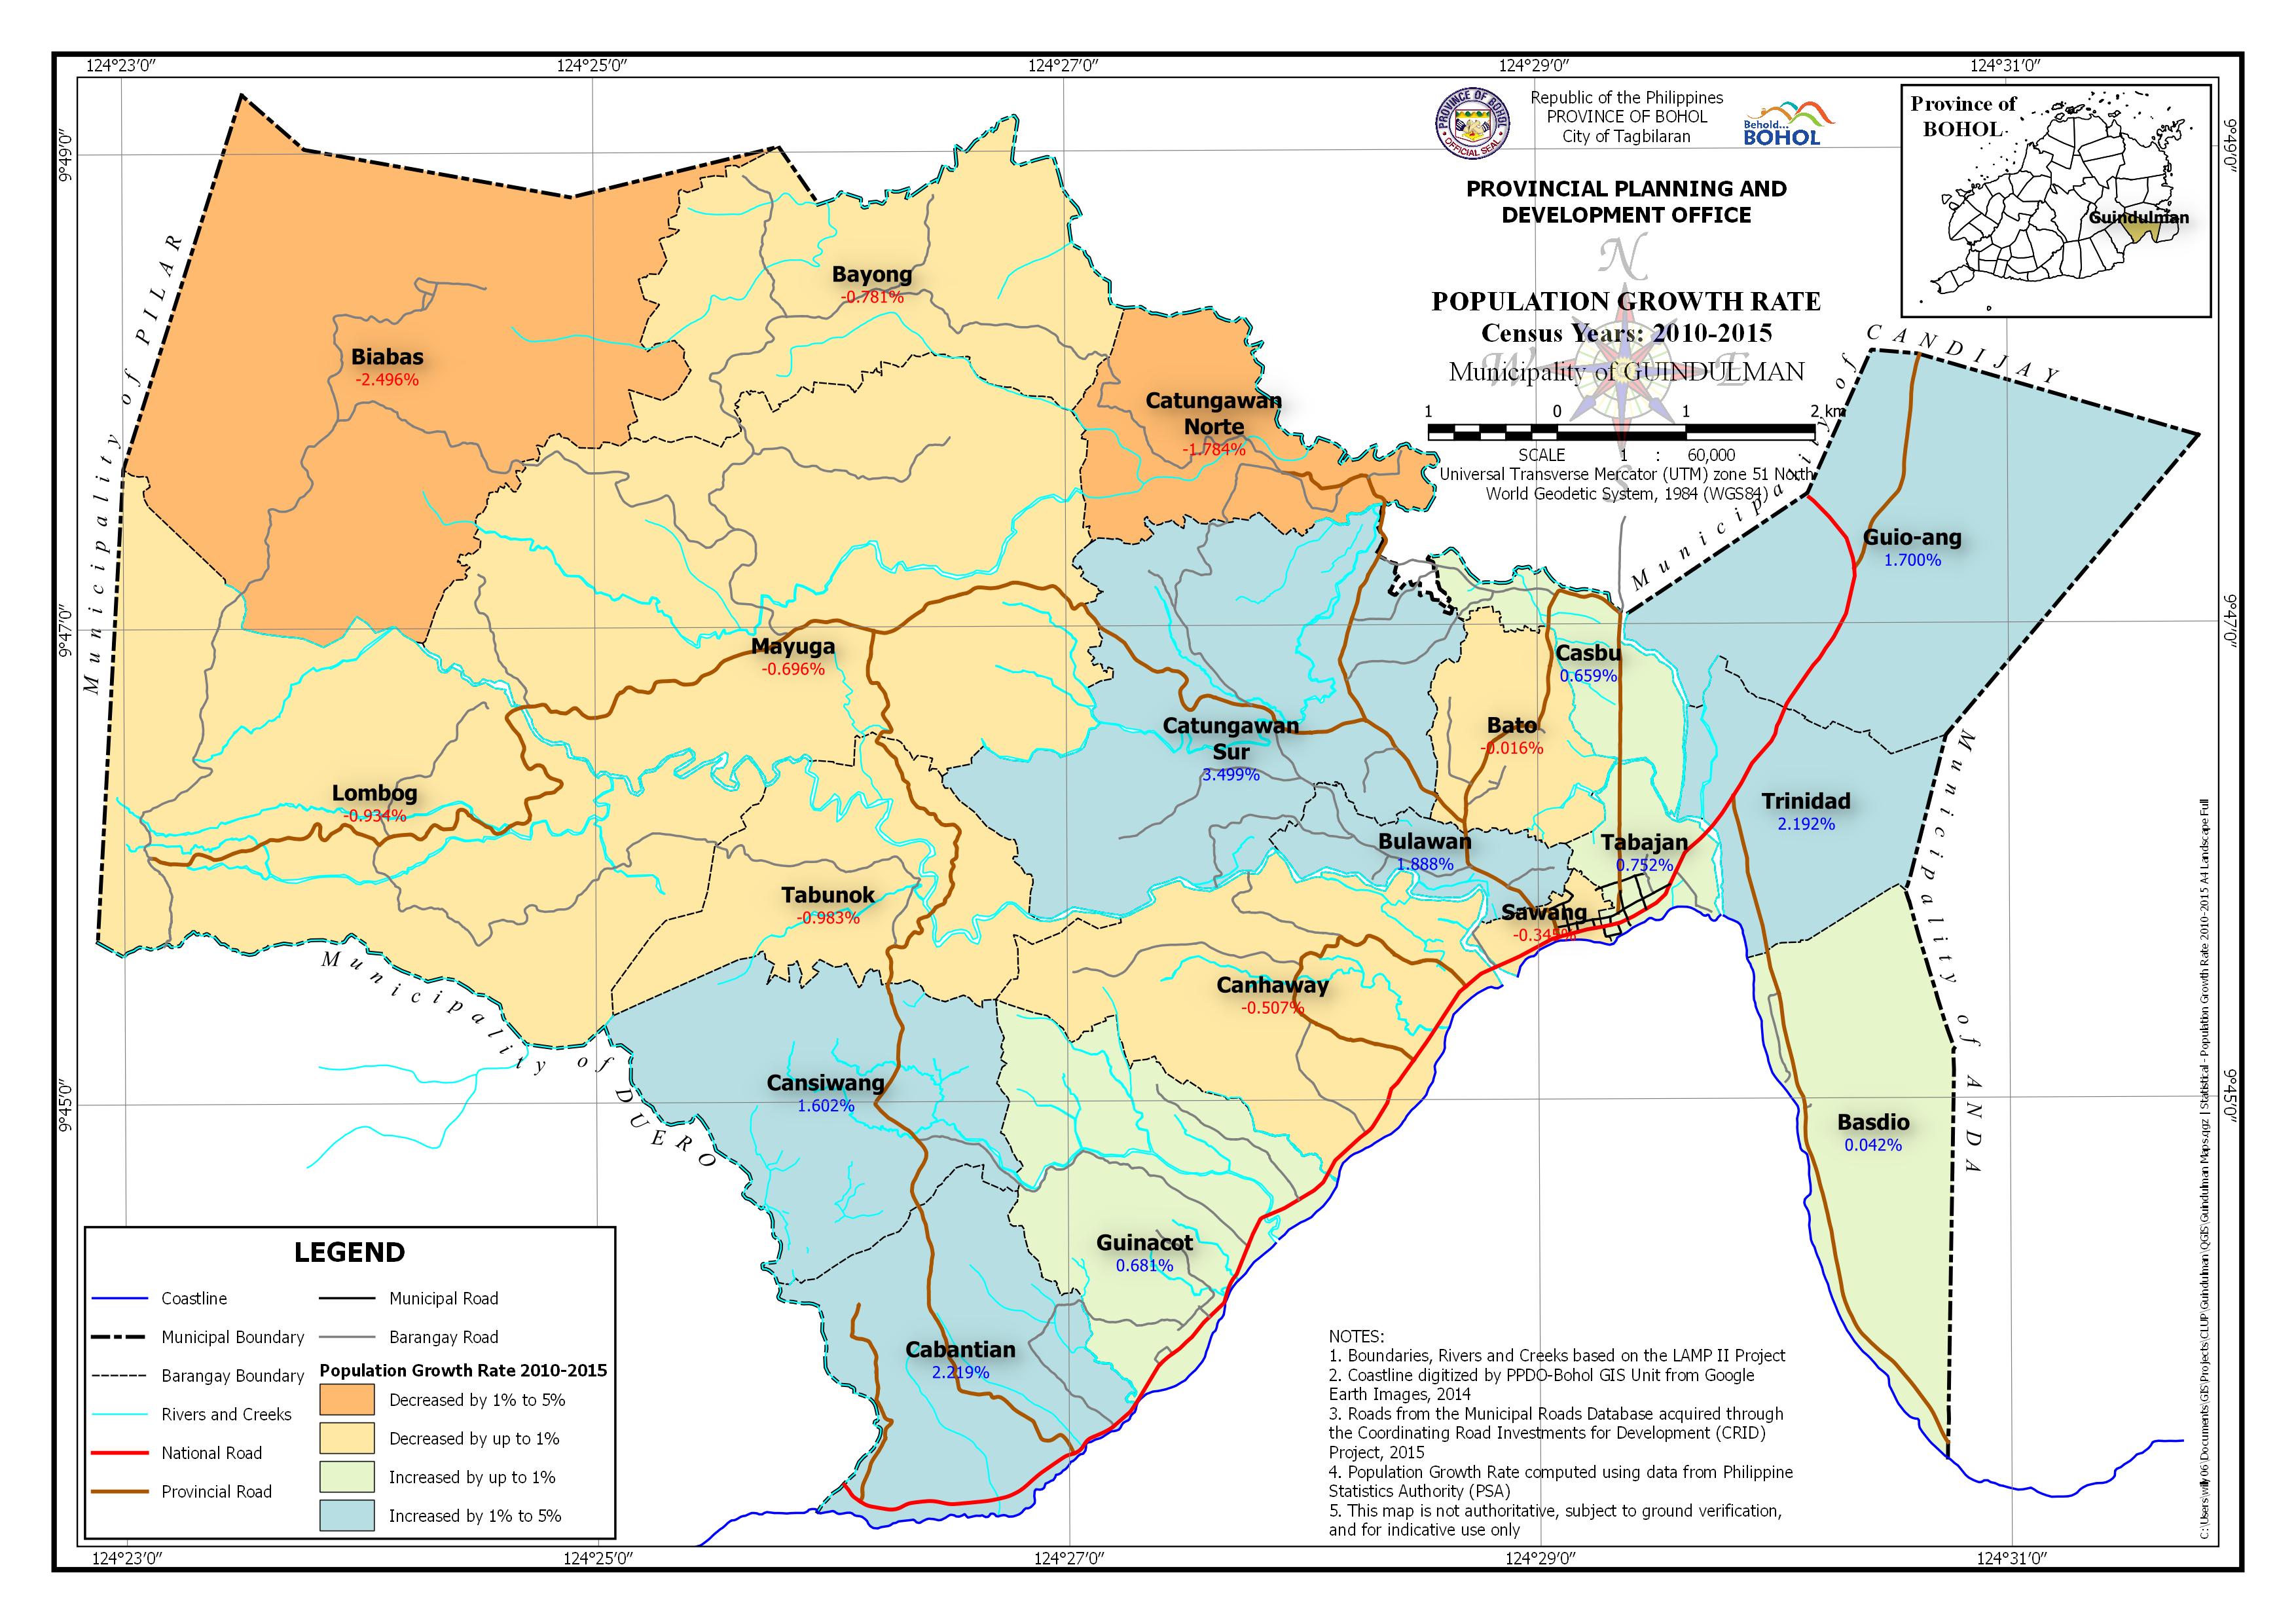 Population Growth Rate 2010-2015 Map